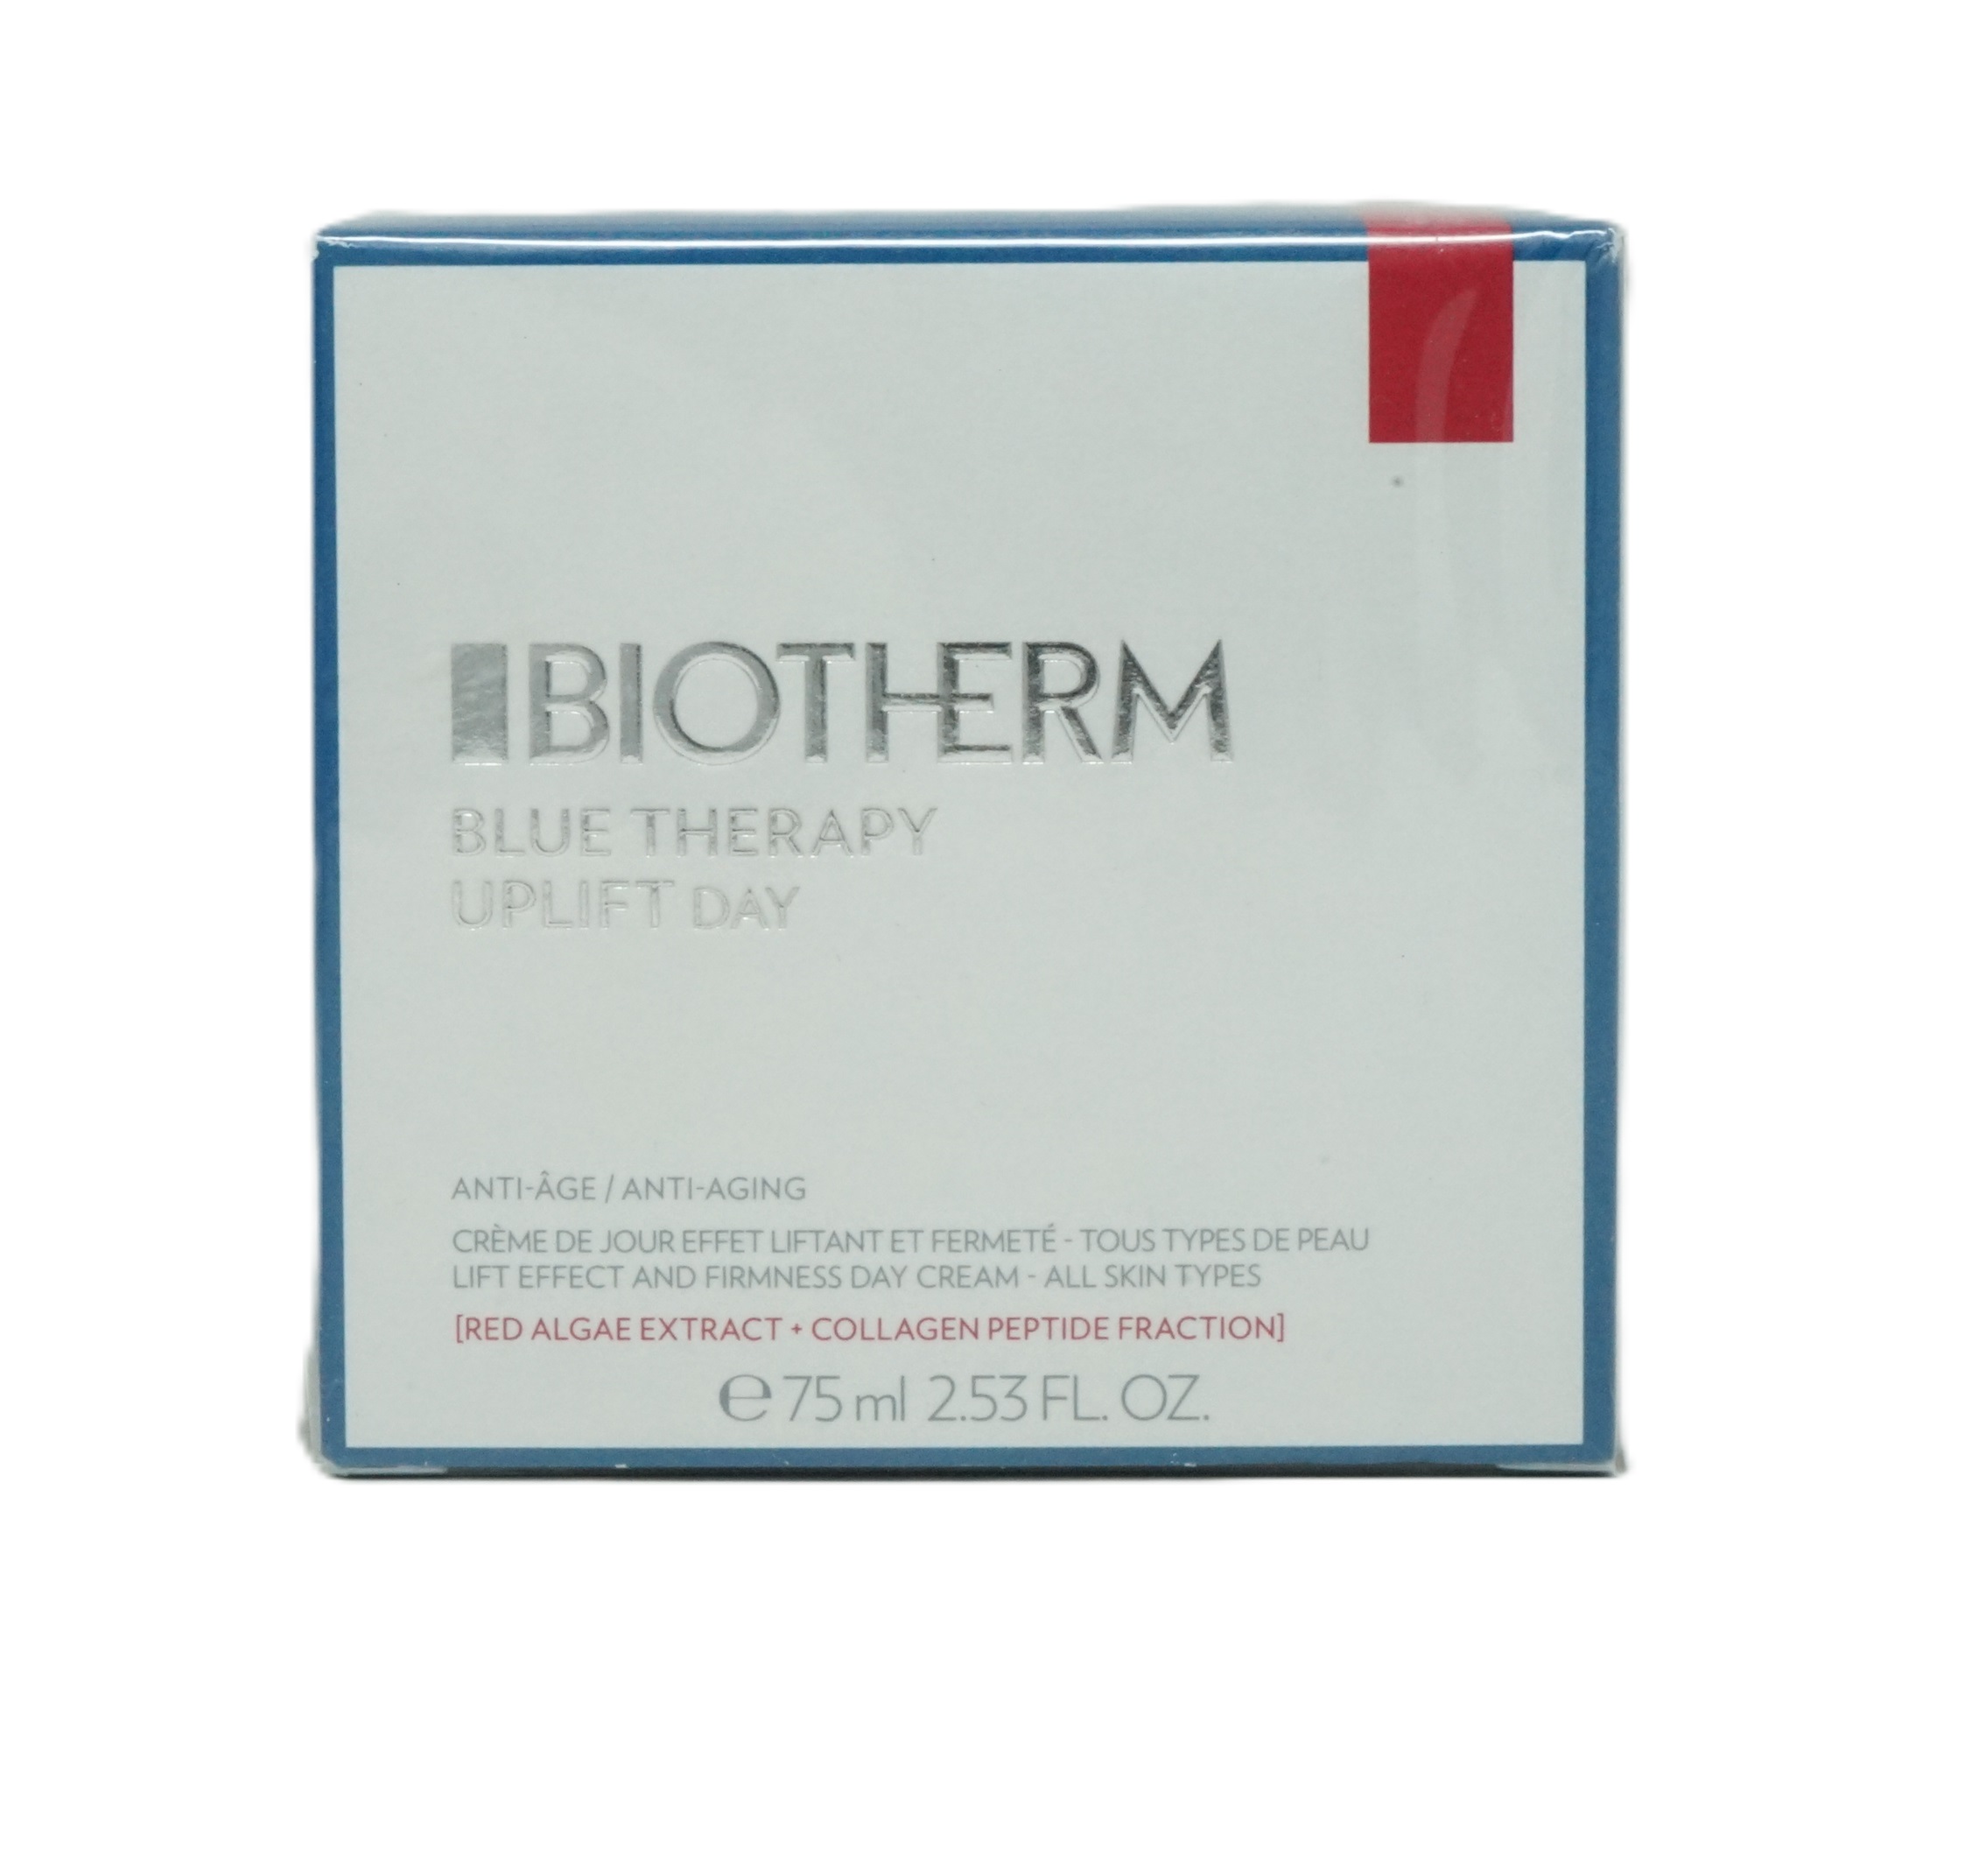 Biotherm Blue Therapy Uplift Day Anti-Aging 75ml